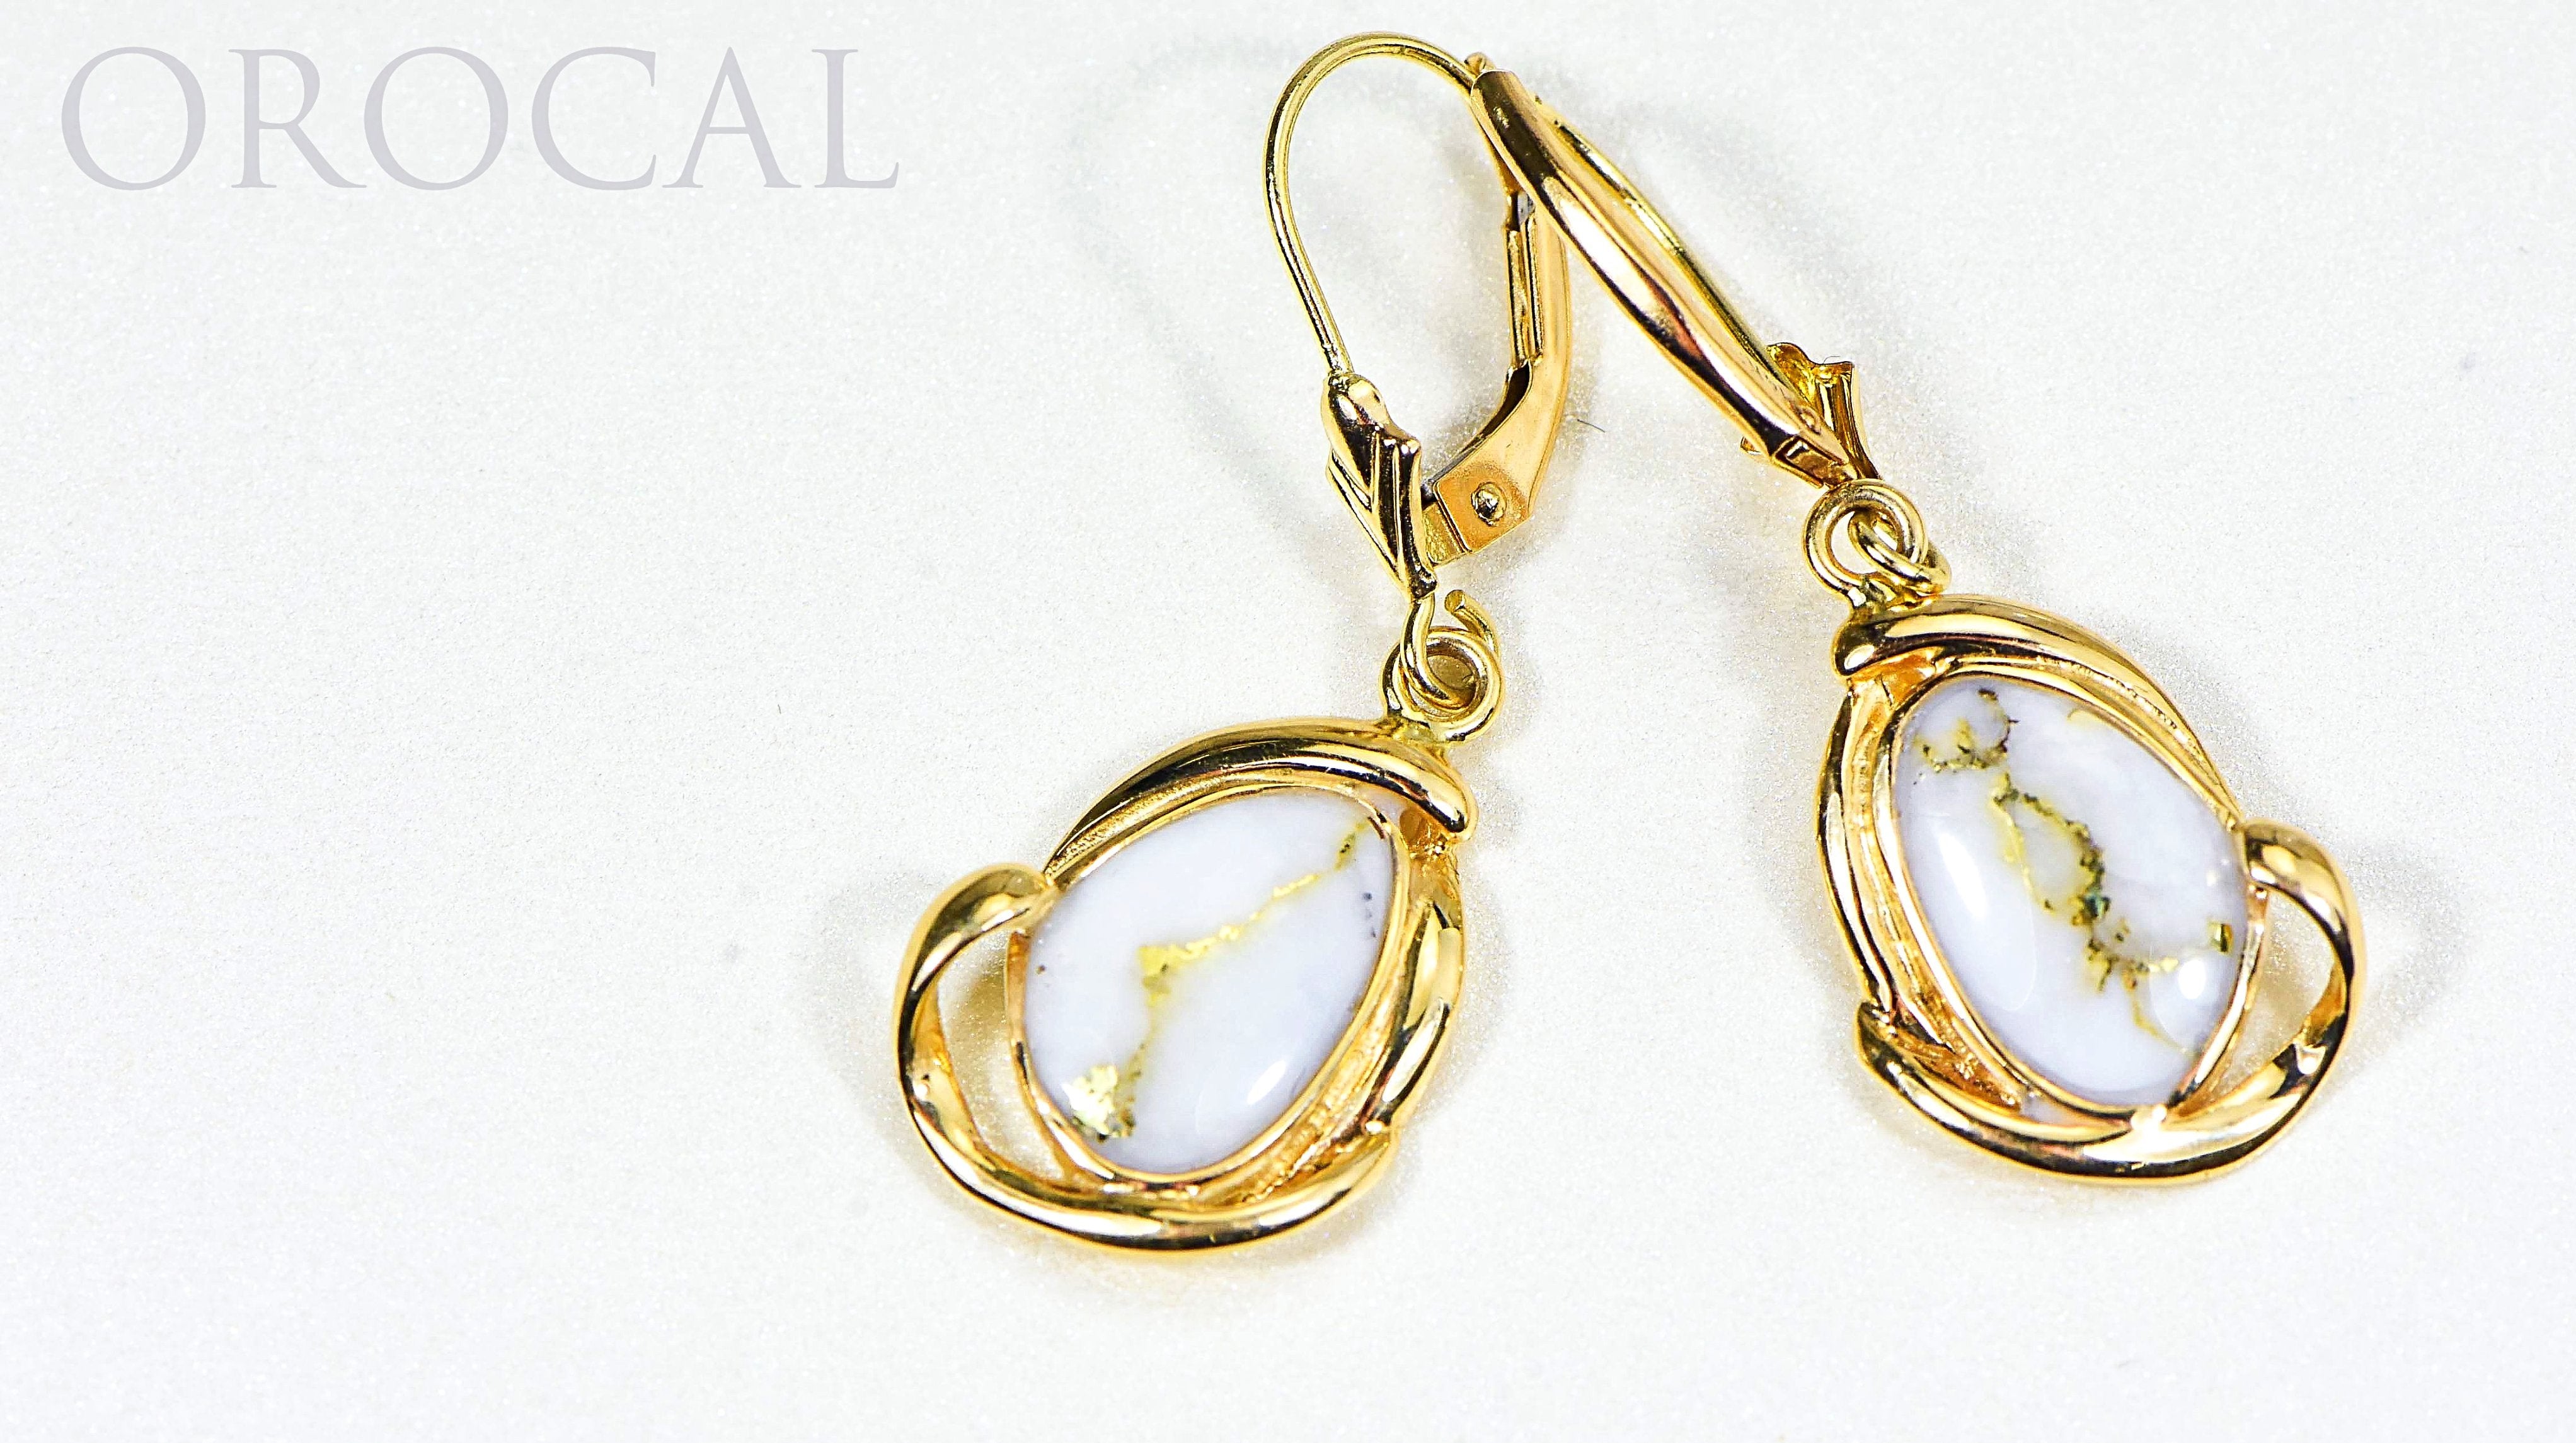 Gold Quartz Earrings "Orocal" EN1105Q/LB Genuine Hand Crafted Jewelry - 14K Gold Casting